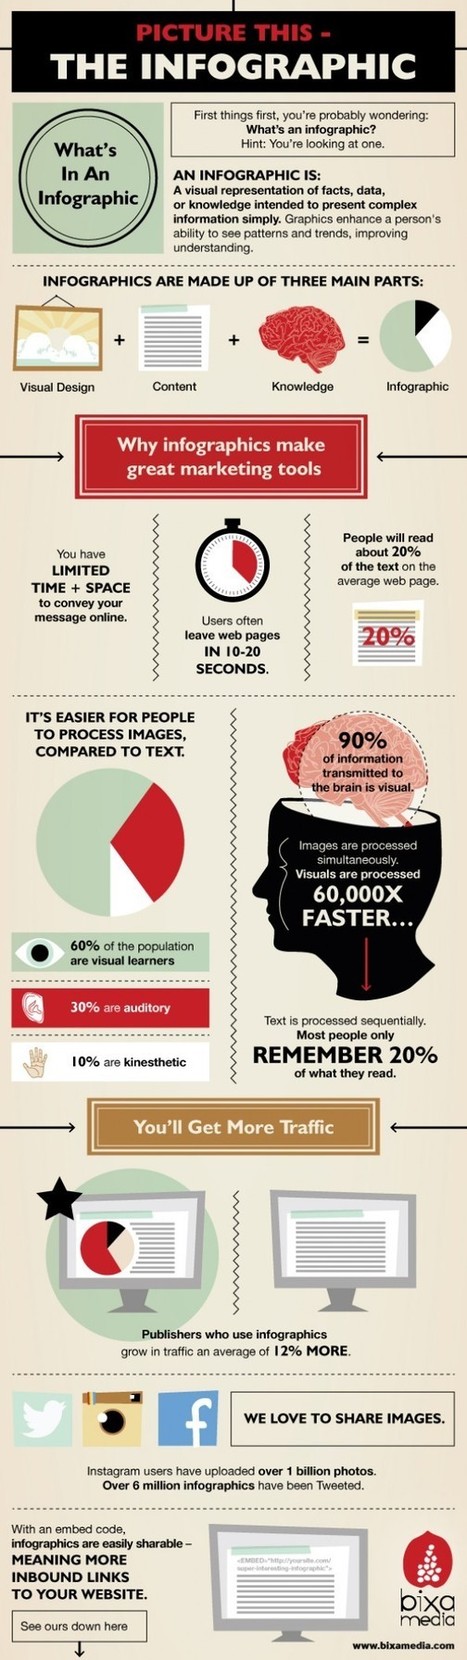 An Infographic About Infographics | Design, Science and Technology | Scoop.it